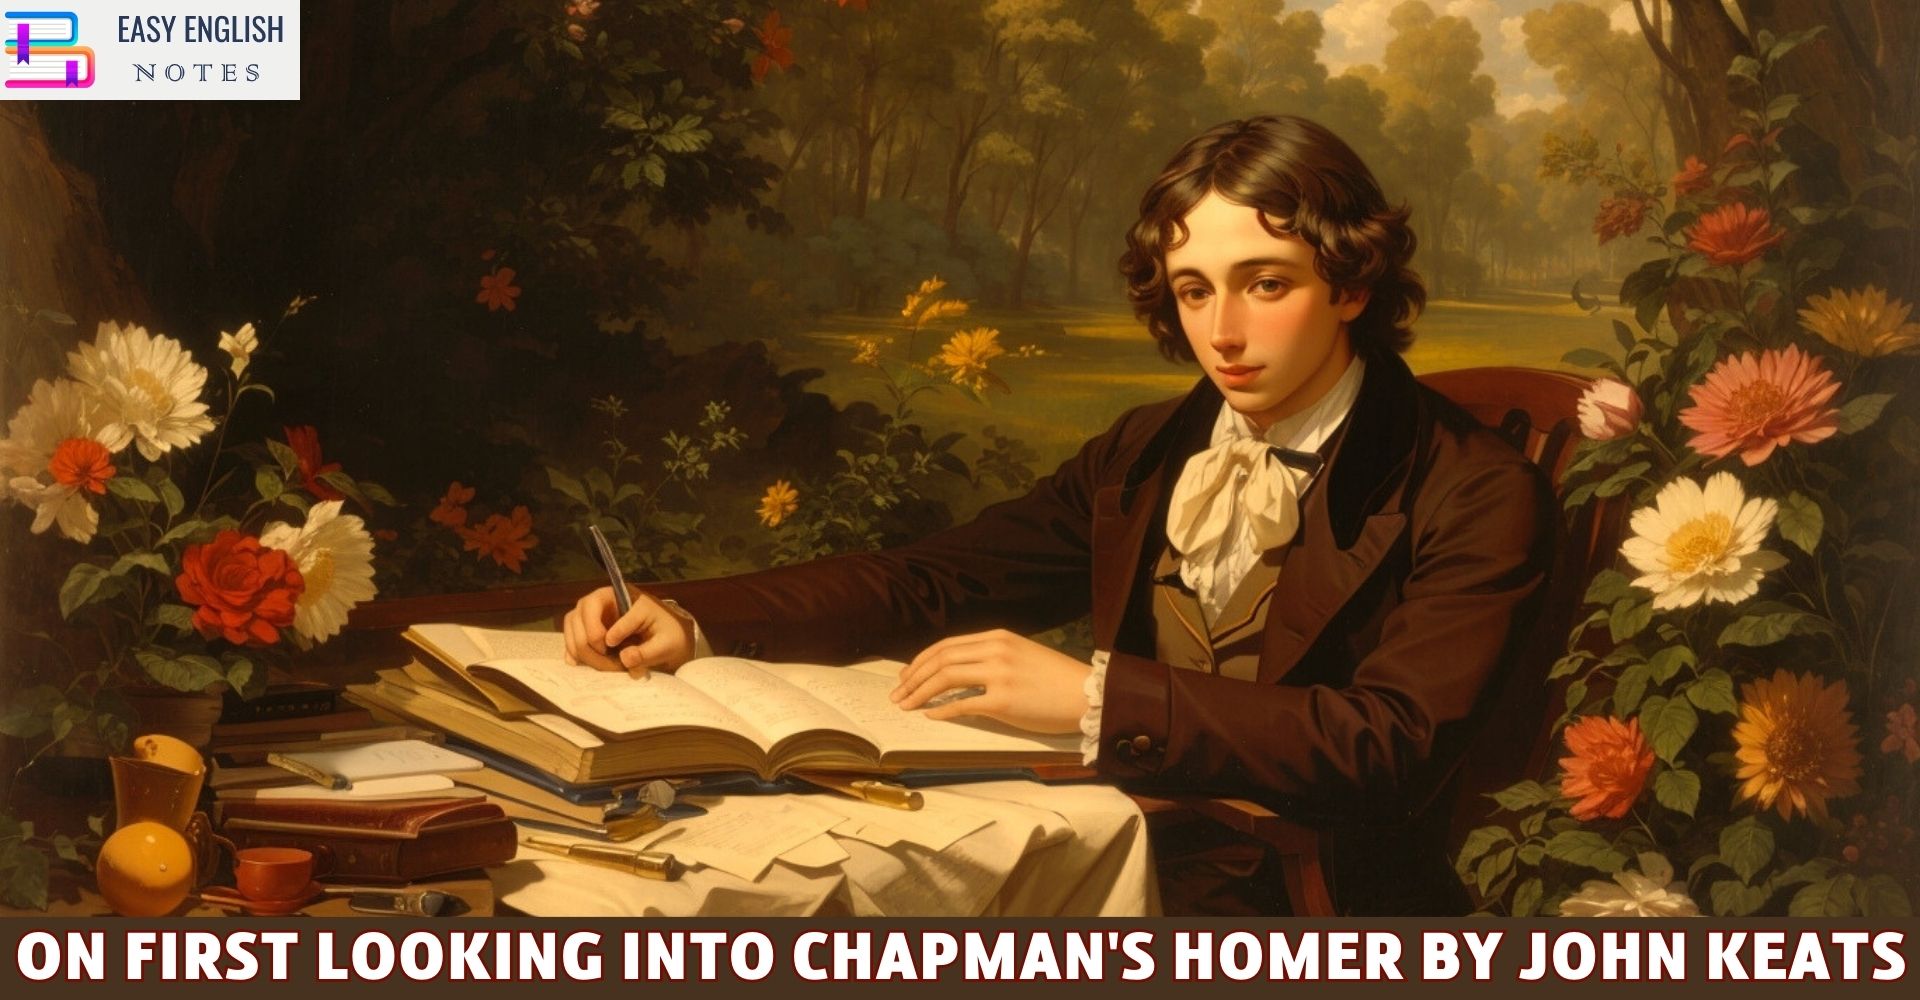 On First Looking into Chapman's Homer by John Keats